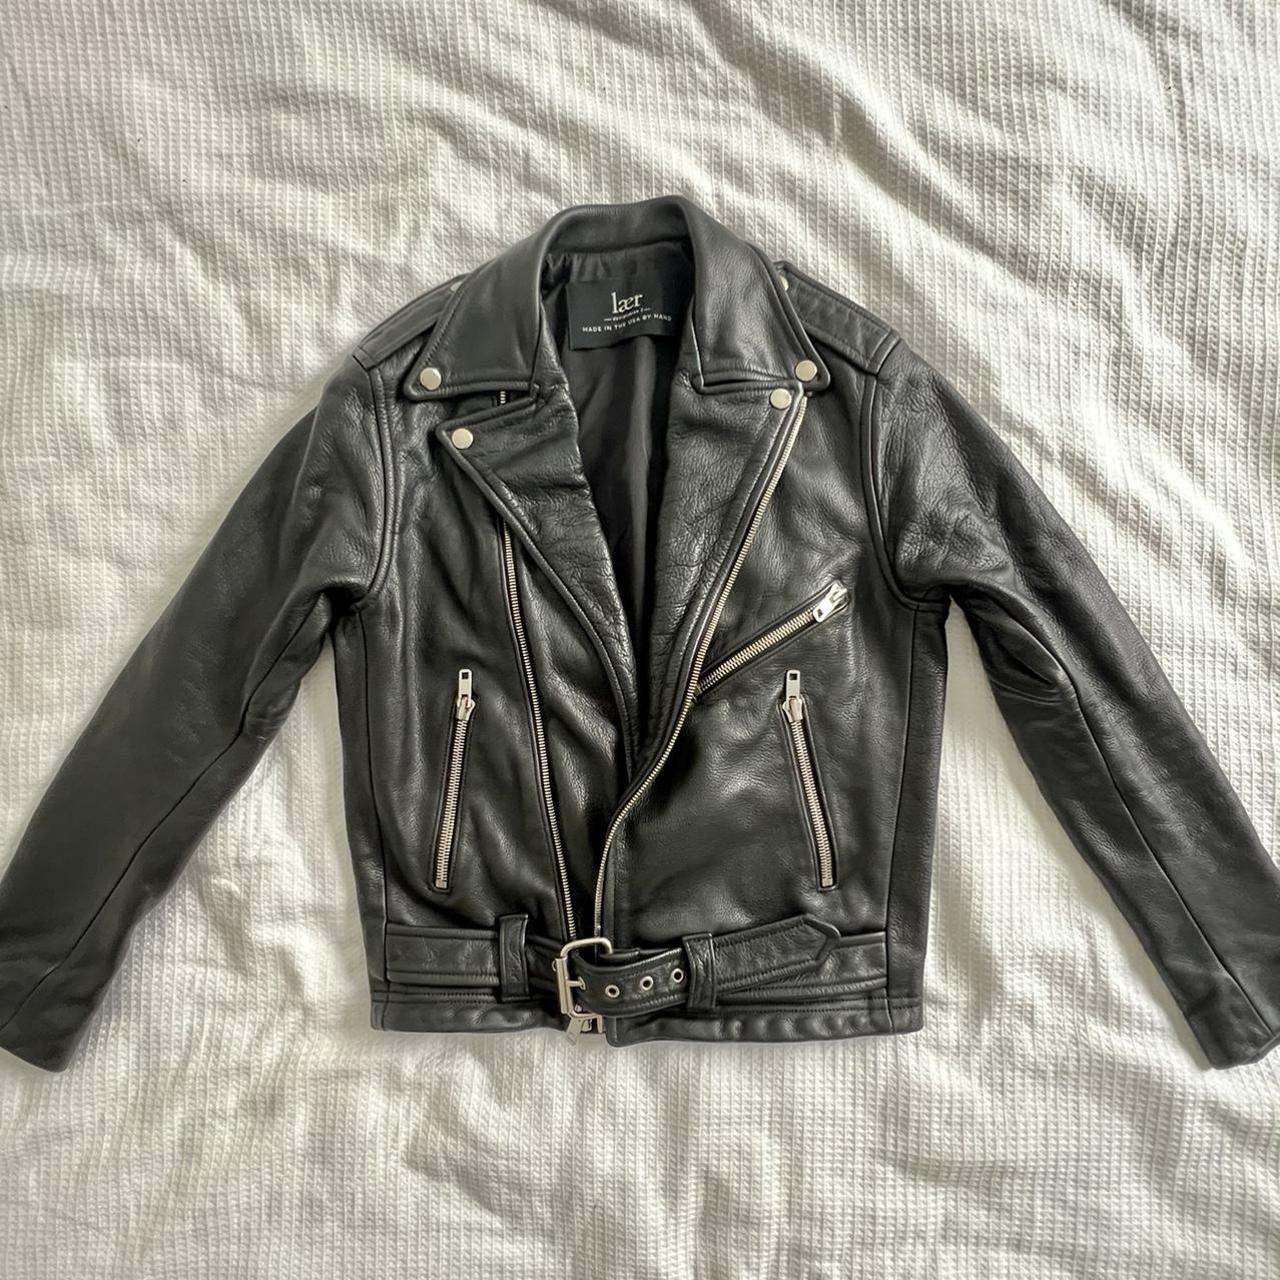 Laer leather jacket - worn with some tarnish to... - Depop